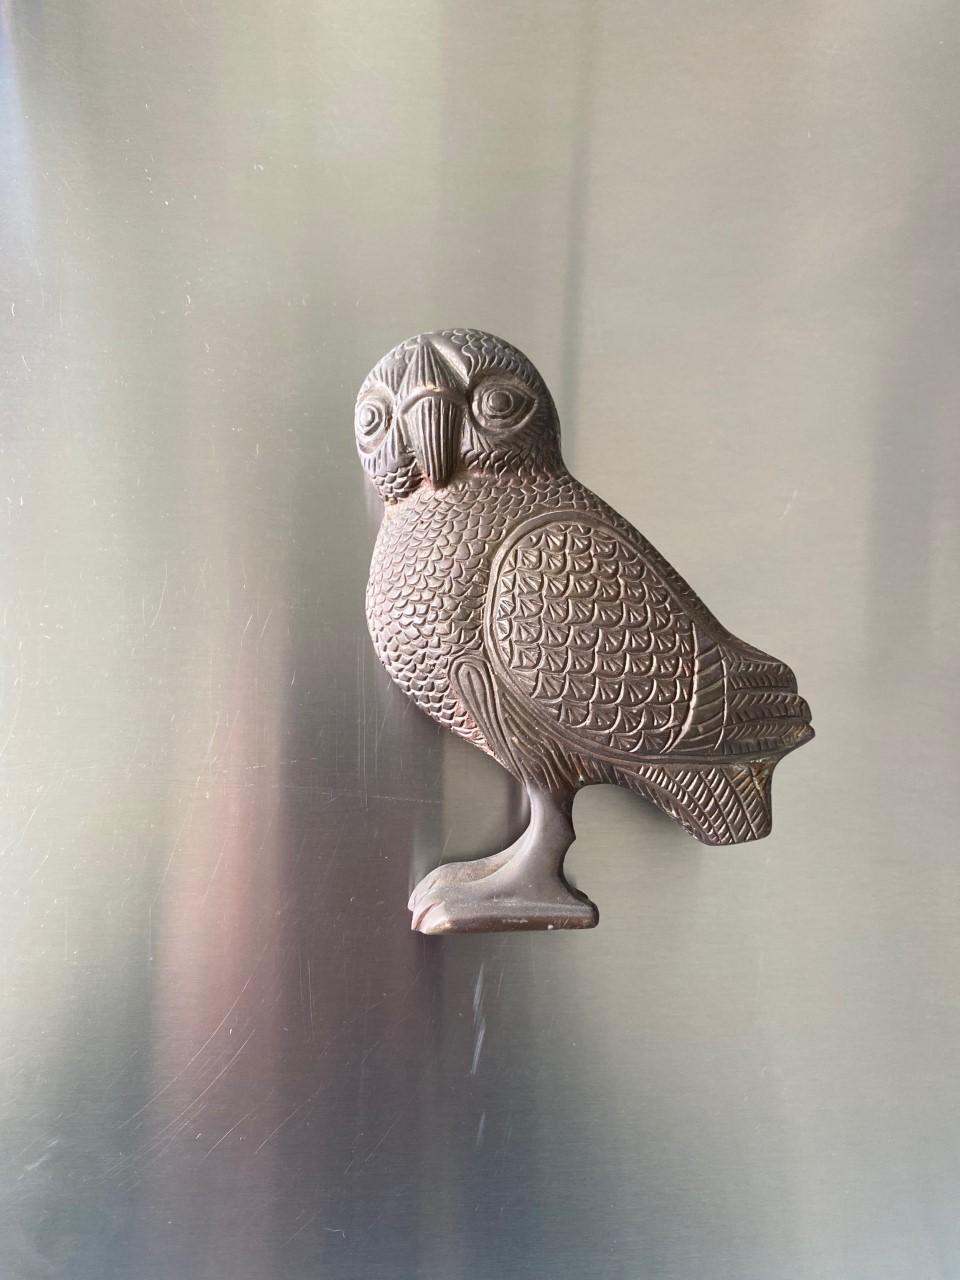 Enigmatic and sublime bronze sculpture of owl of Athena. Traditionally a companion to the goddess of wisdom, the owl representation has been associated with knowledge and wisdom. This mid century representation in bronze of the owl of Athena